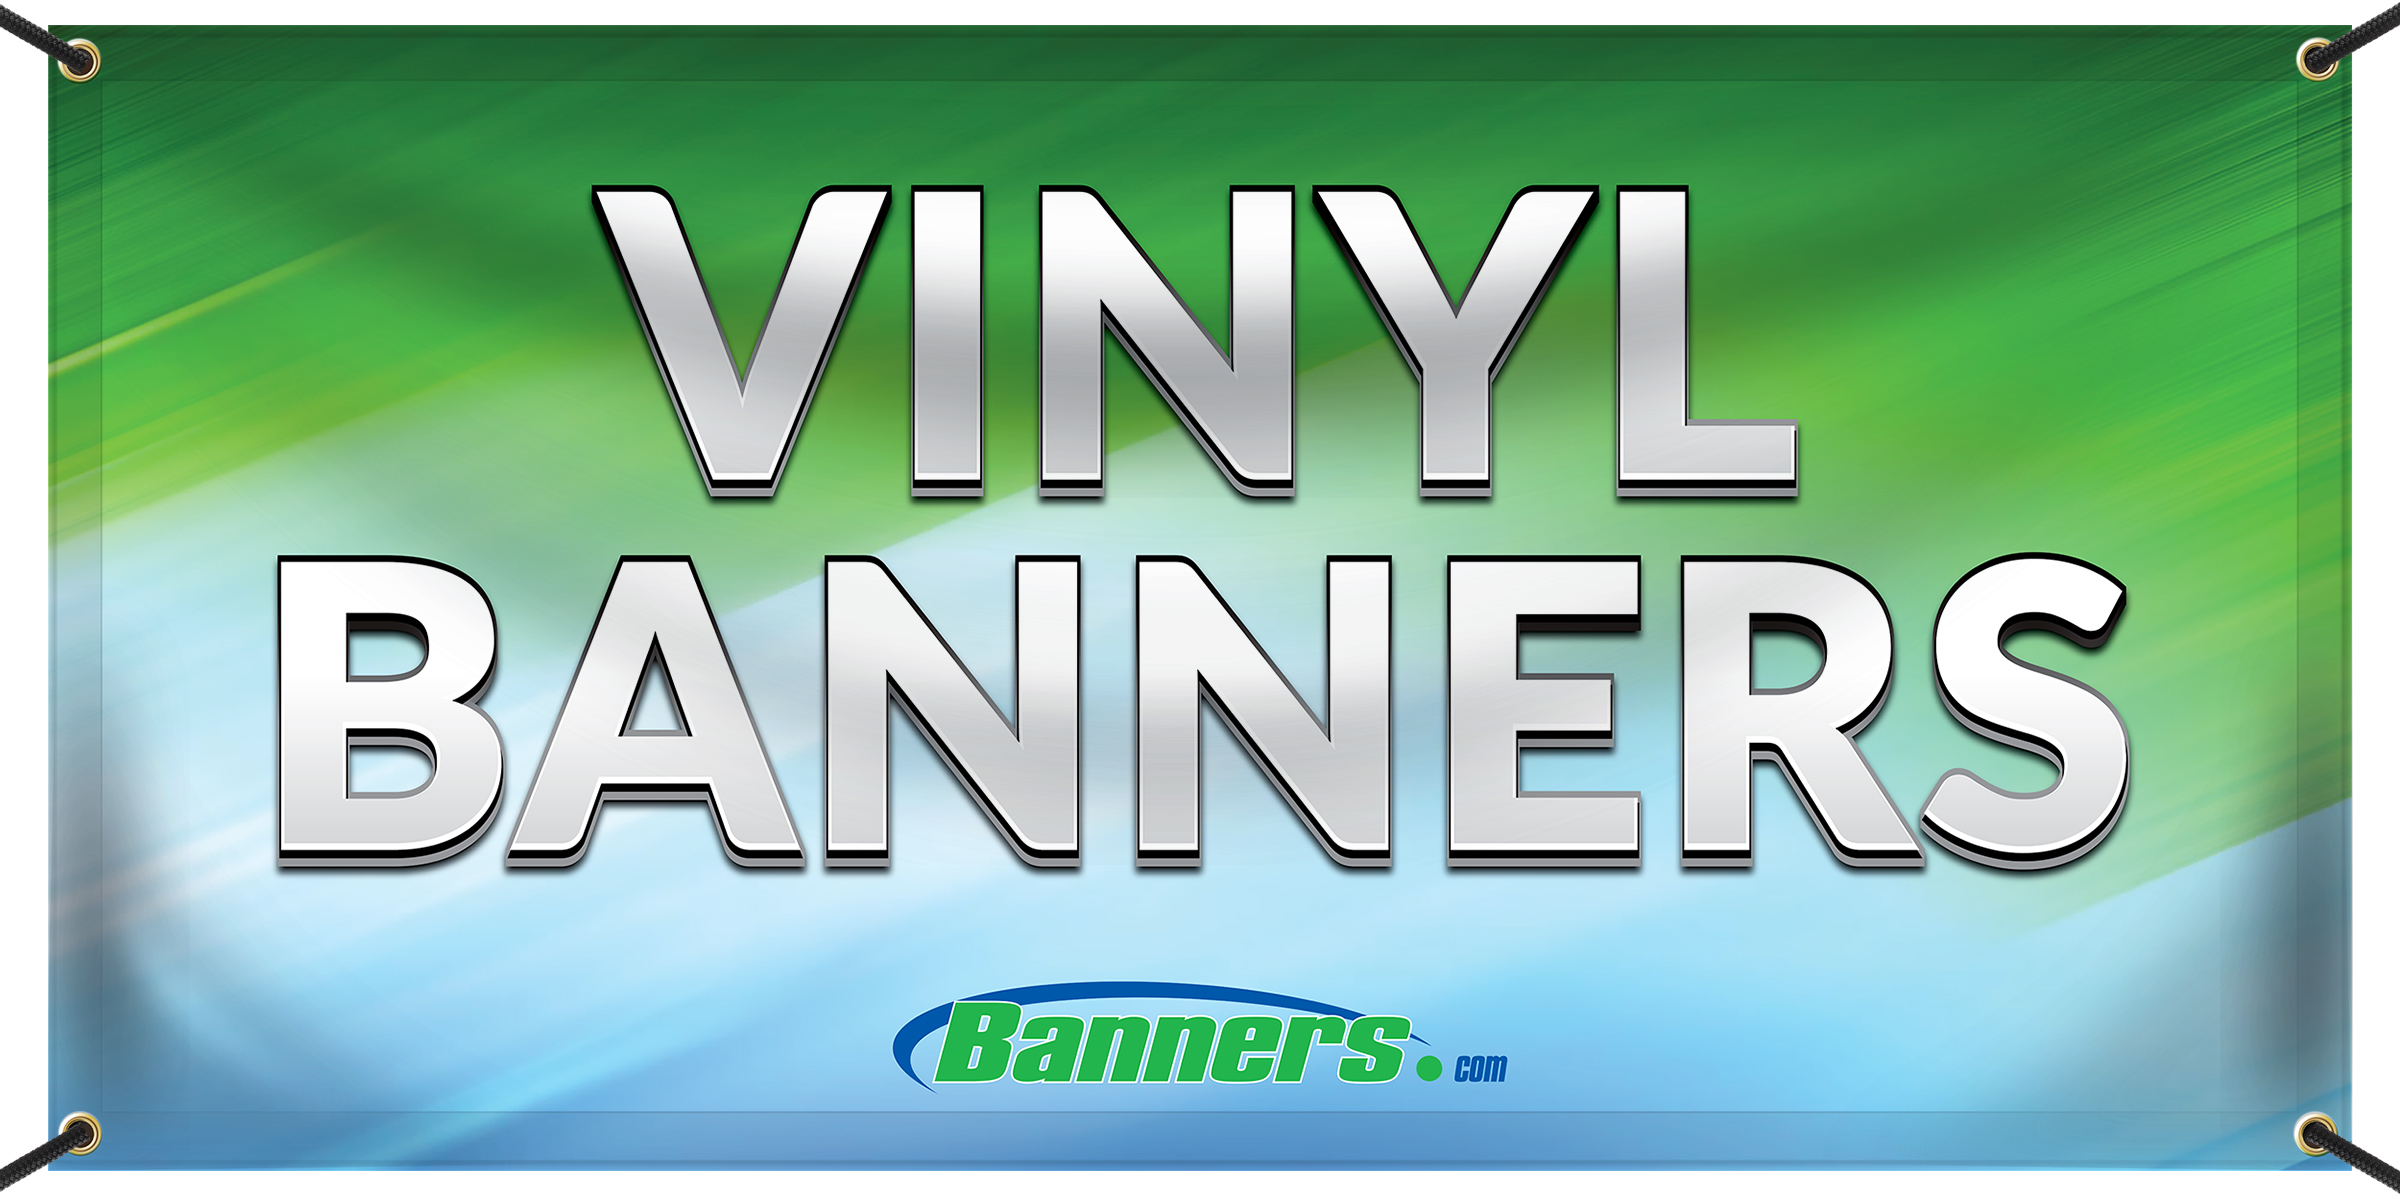 Example vinyl banners design for Banners.com